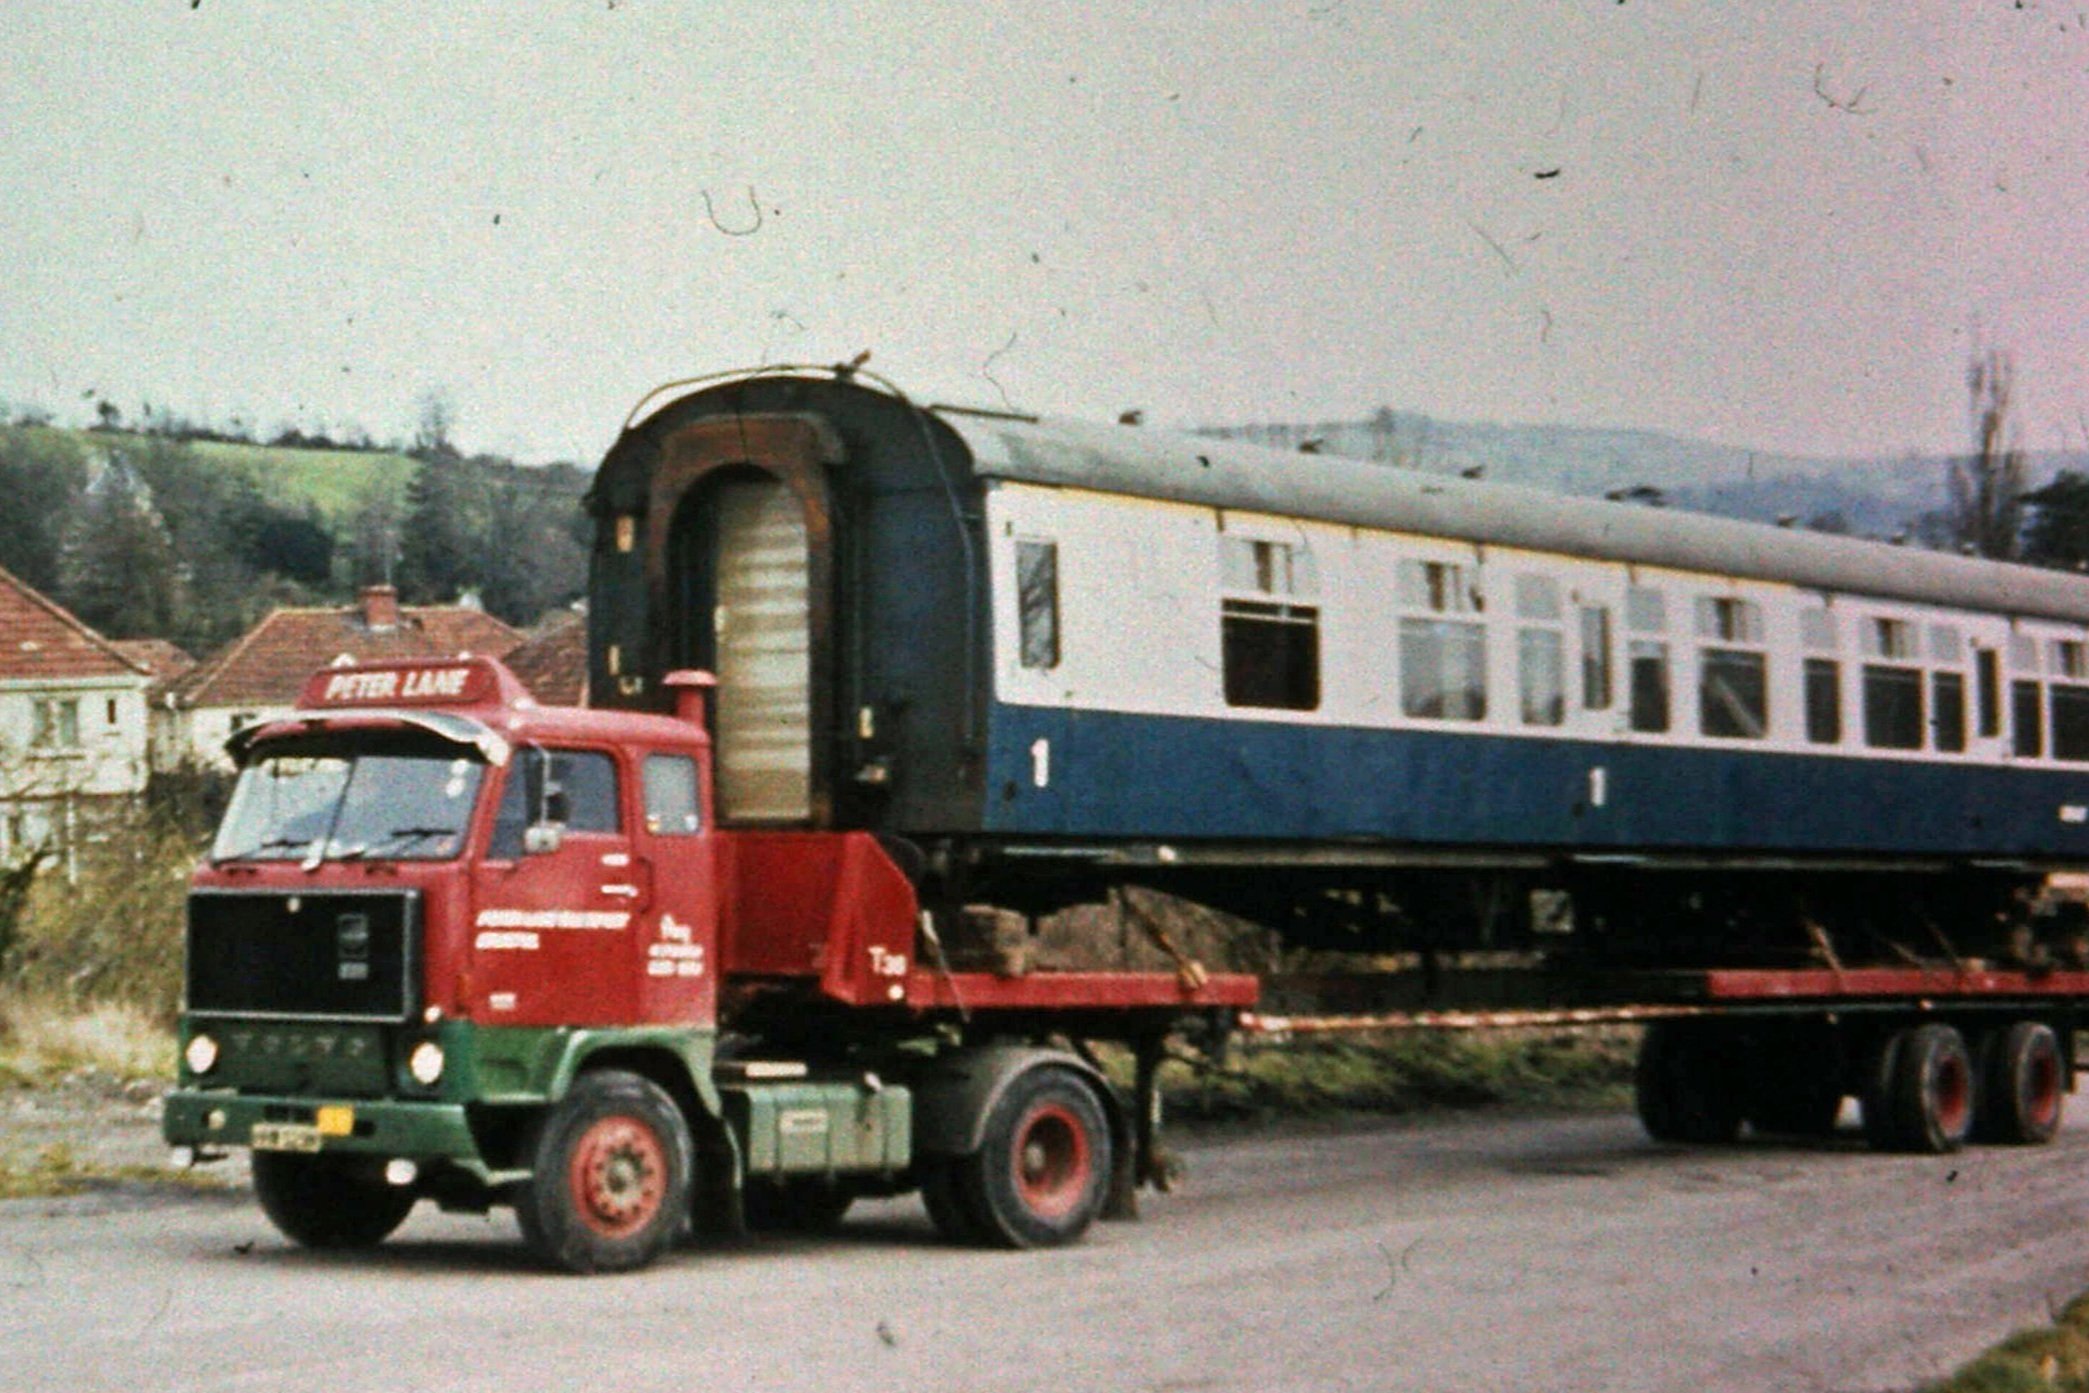 The body of 15447 is transported up the incline into Bitton Station.